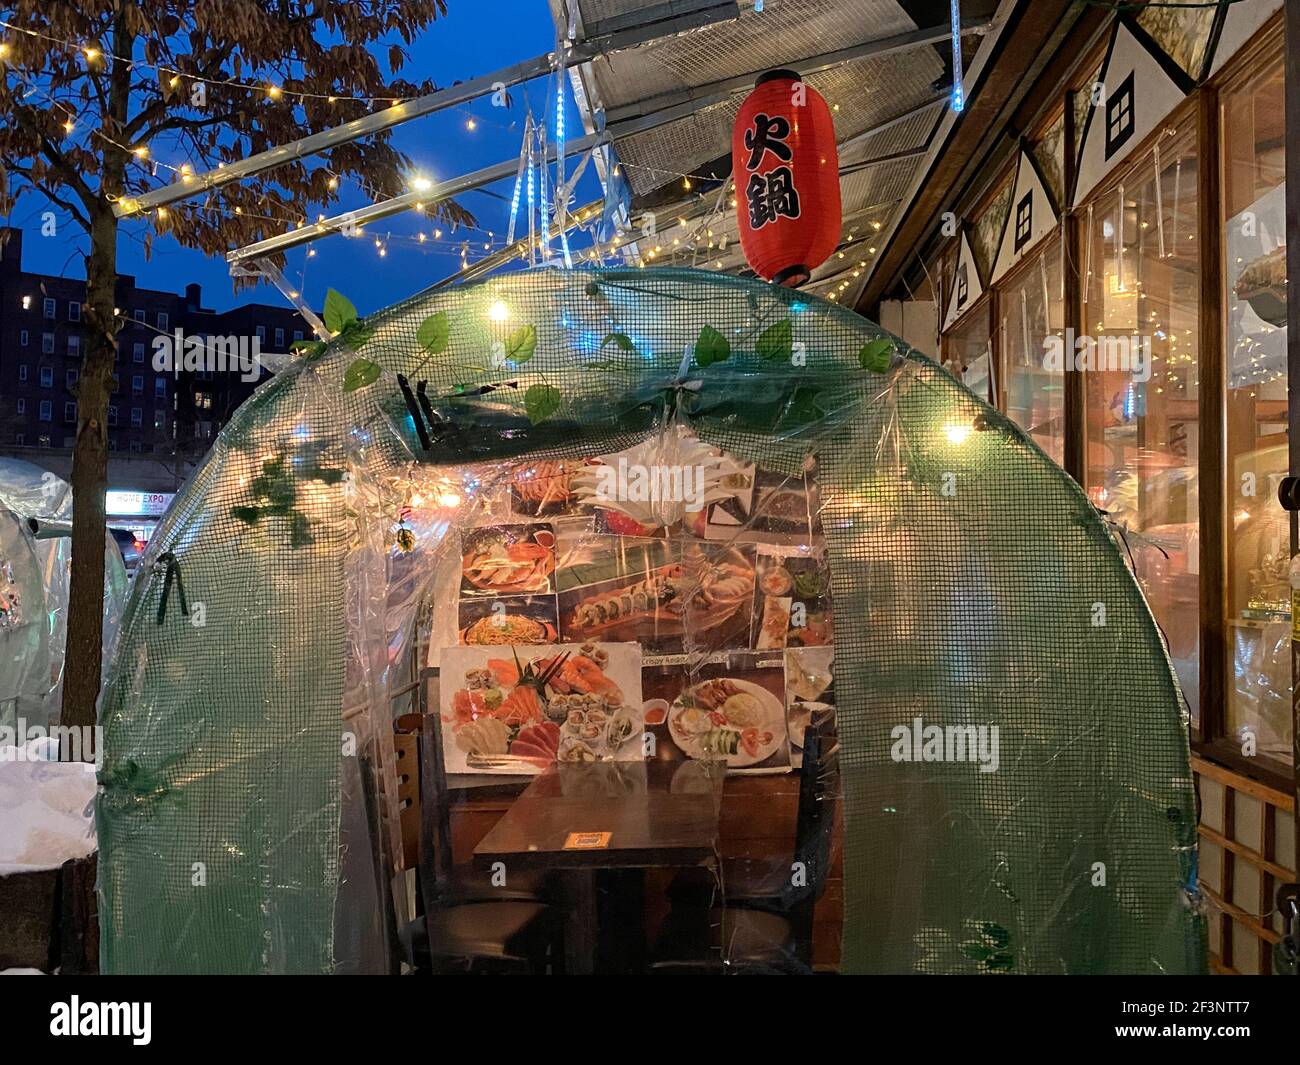 Japanese restaurant with igloo shaped outdoor dining sheds, Rego Park, Queens, New York Stock Photo